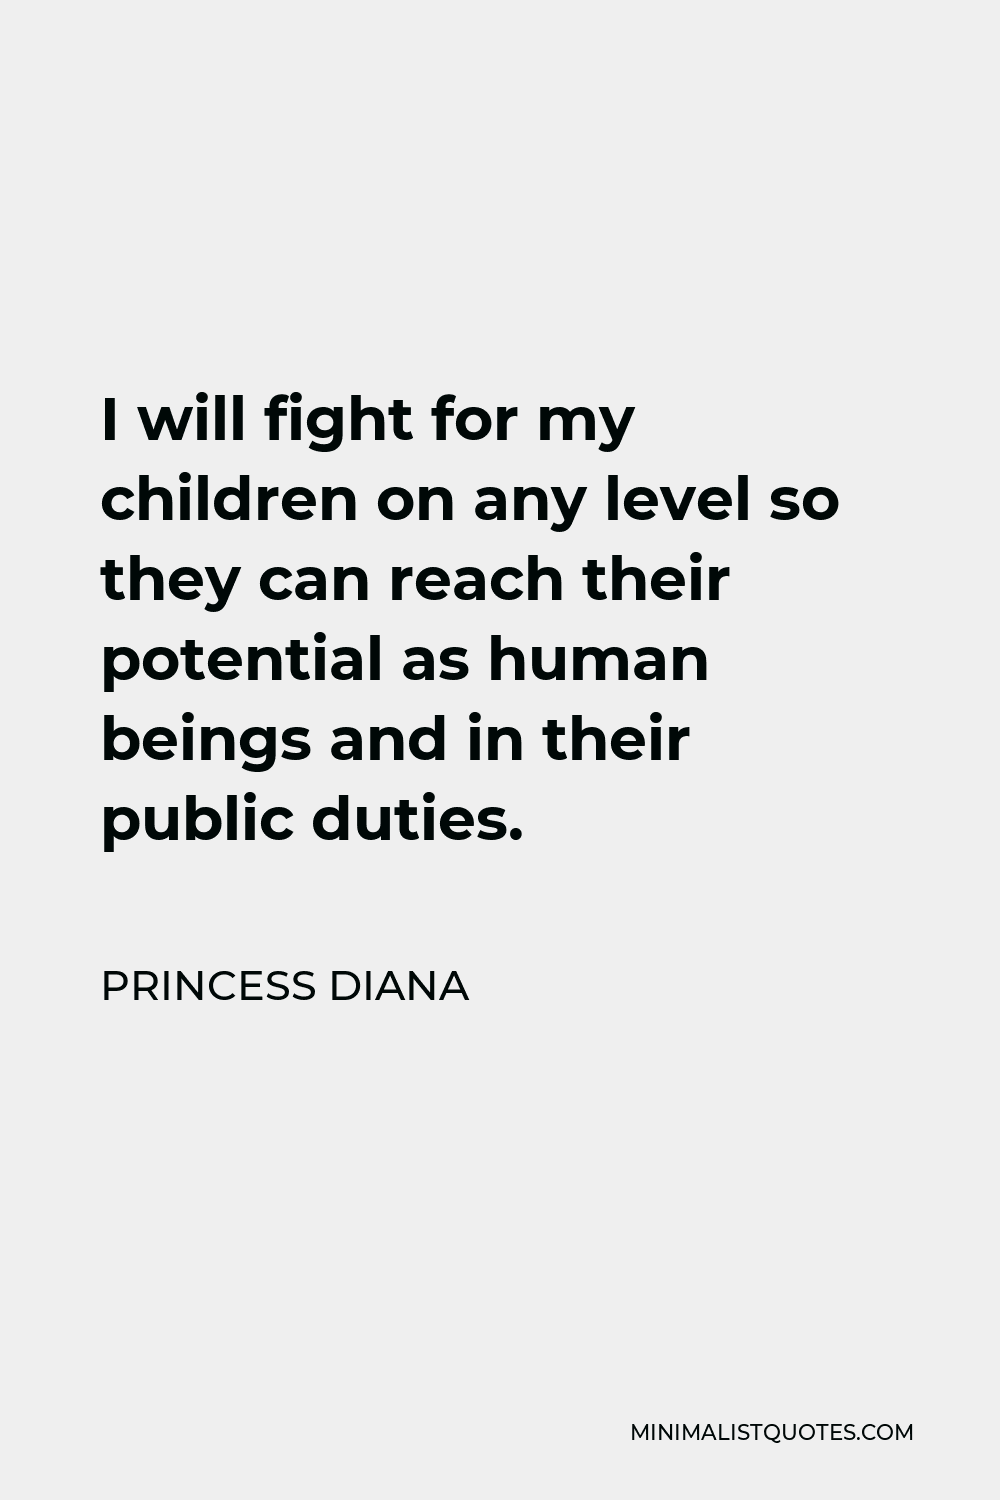 Princess Diana Quote - I will fight for my children on any level so they can reach their potential as human beings and in their public duties.